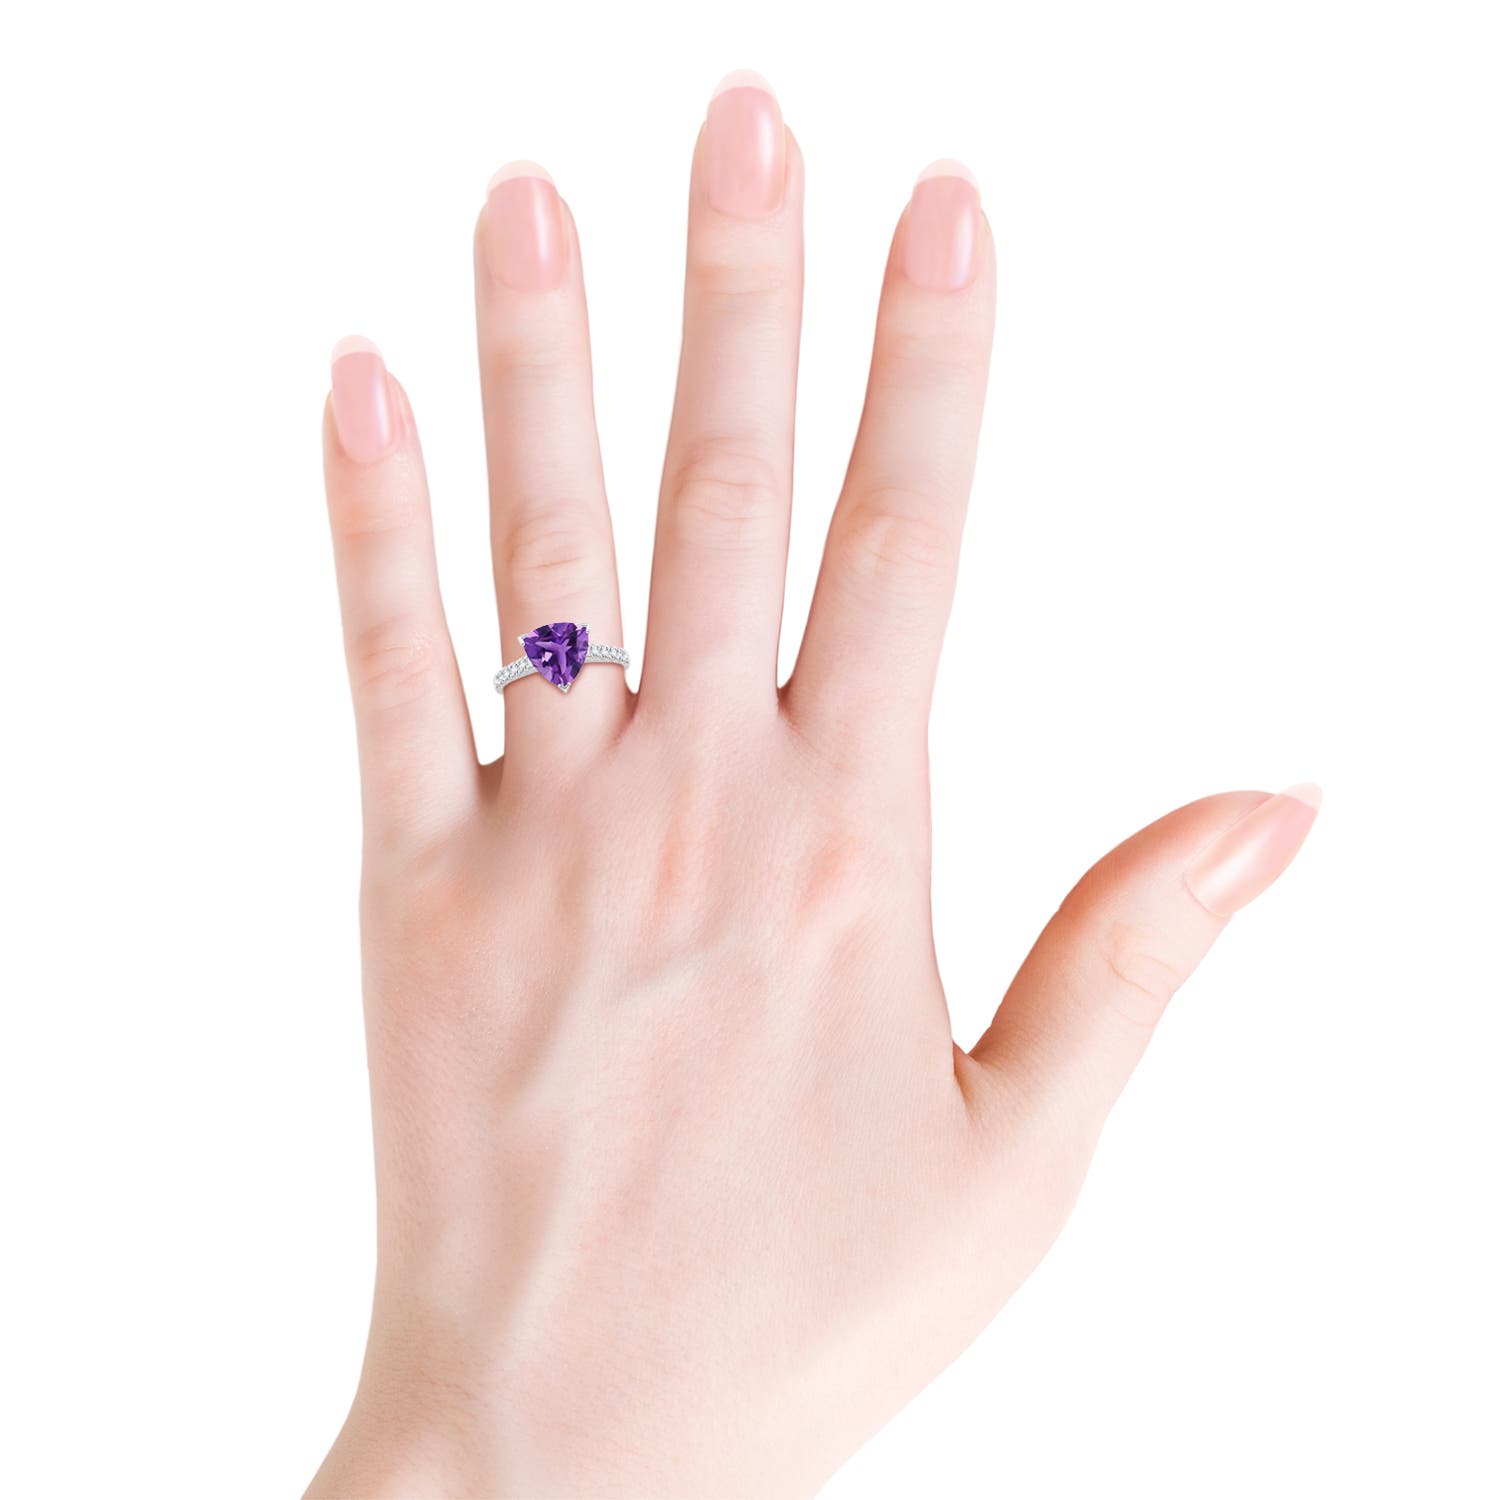 AAA - Amethyst / 2.53 CT / 14 KT White Gold